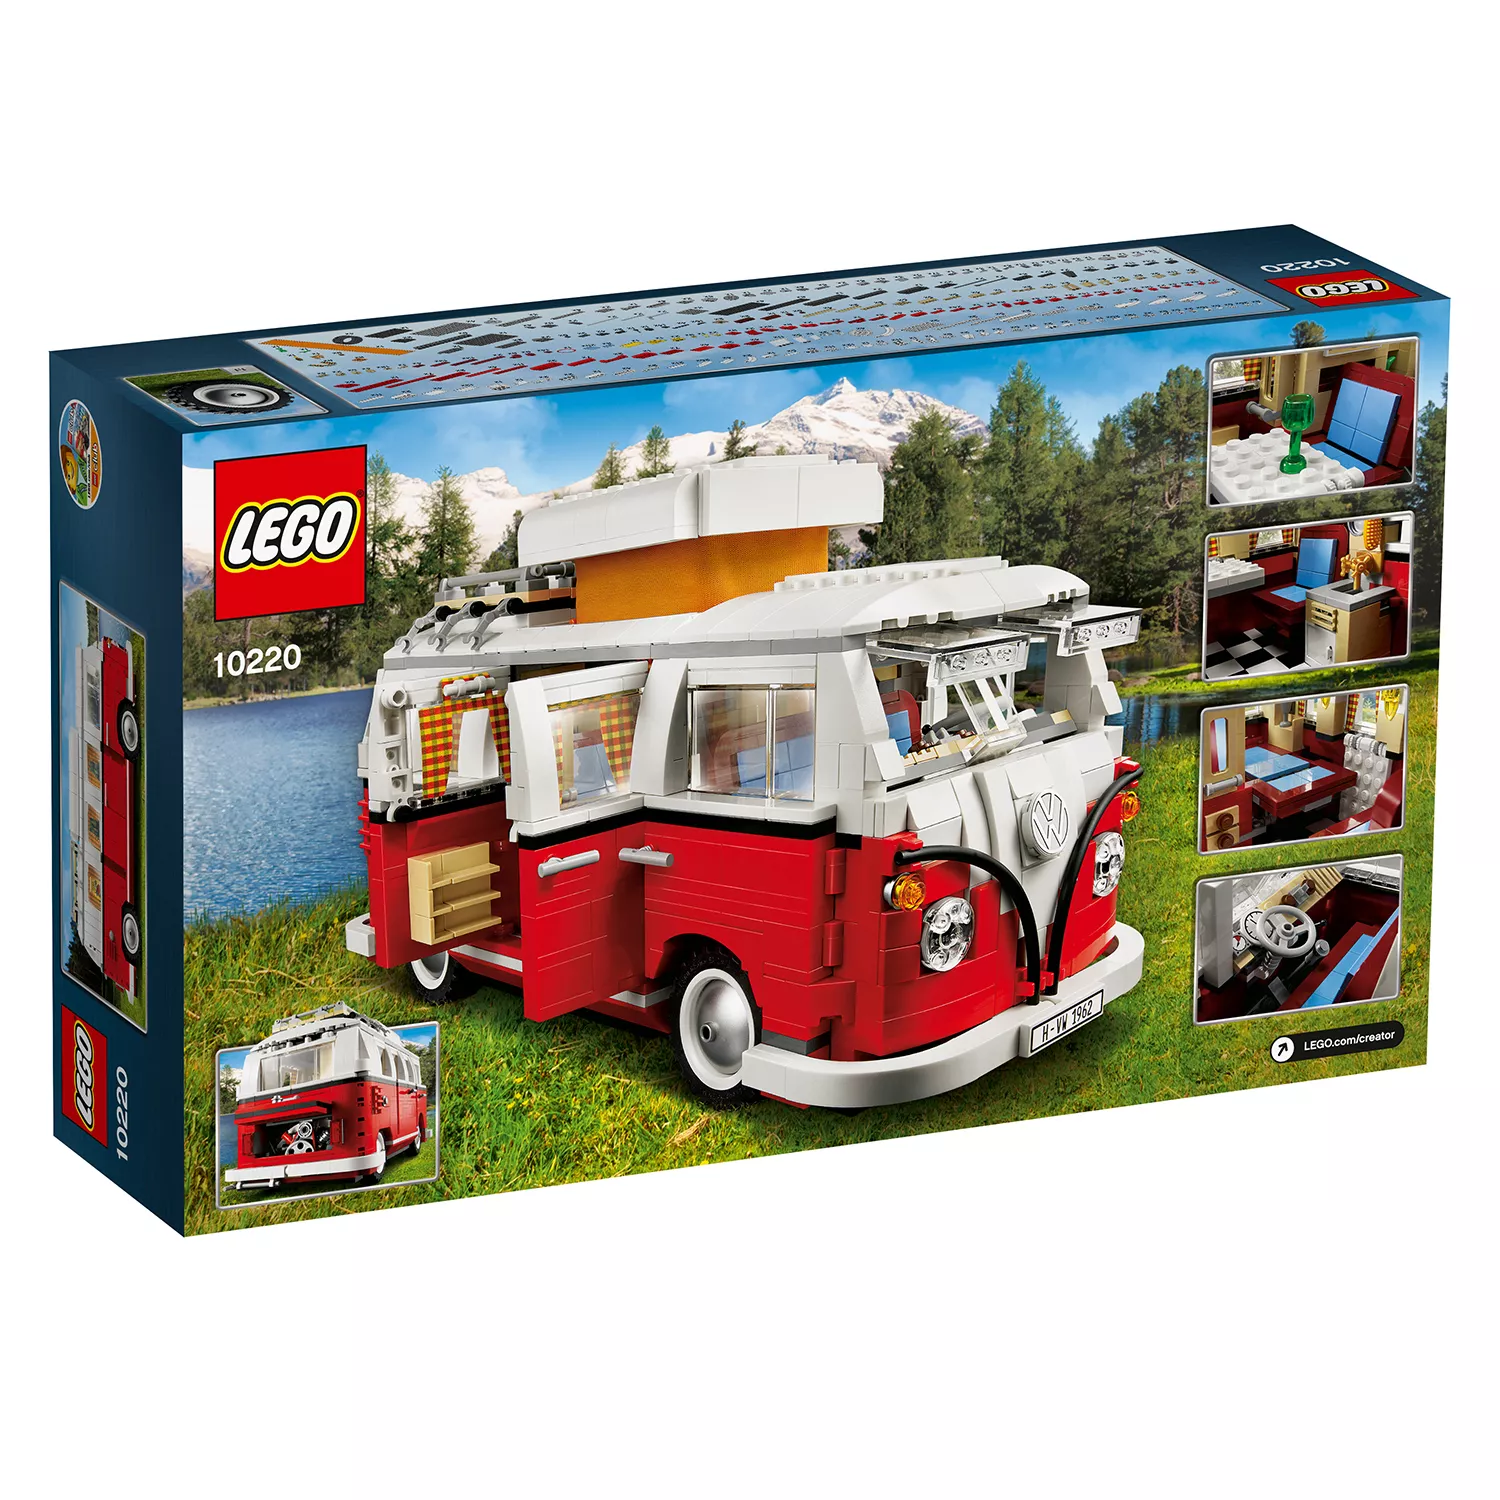 LEGO Hard to Find Items Volkswagen T1 Campingbus - 10220